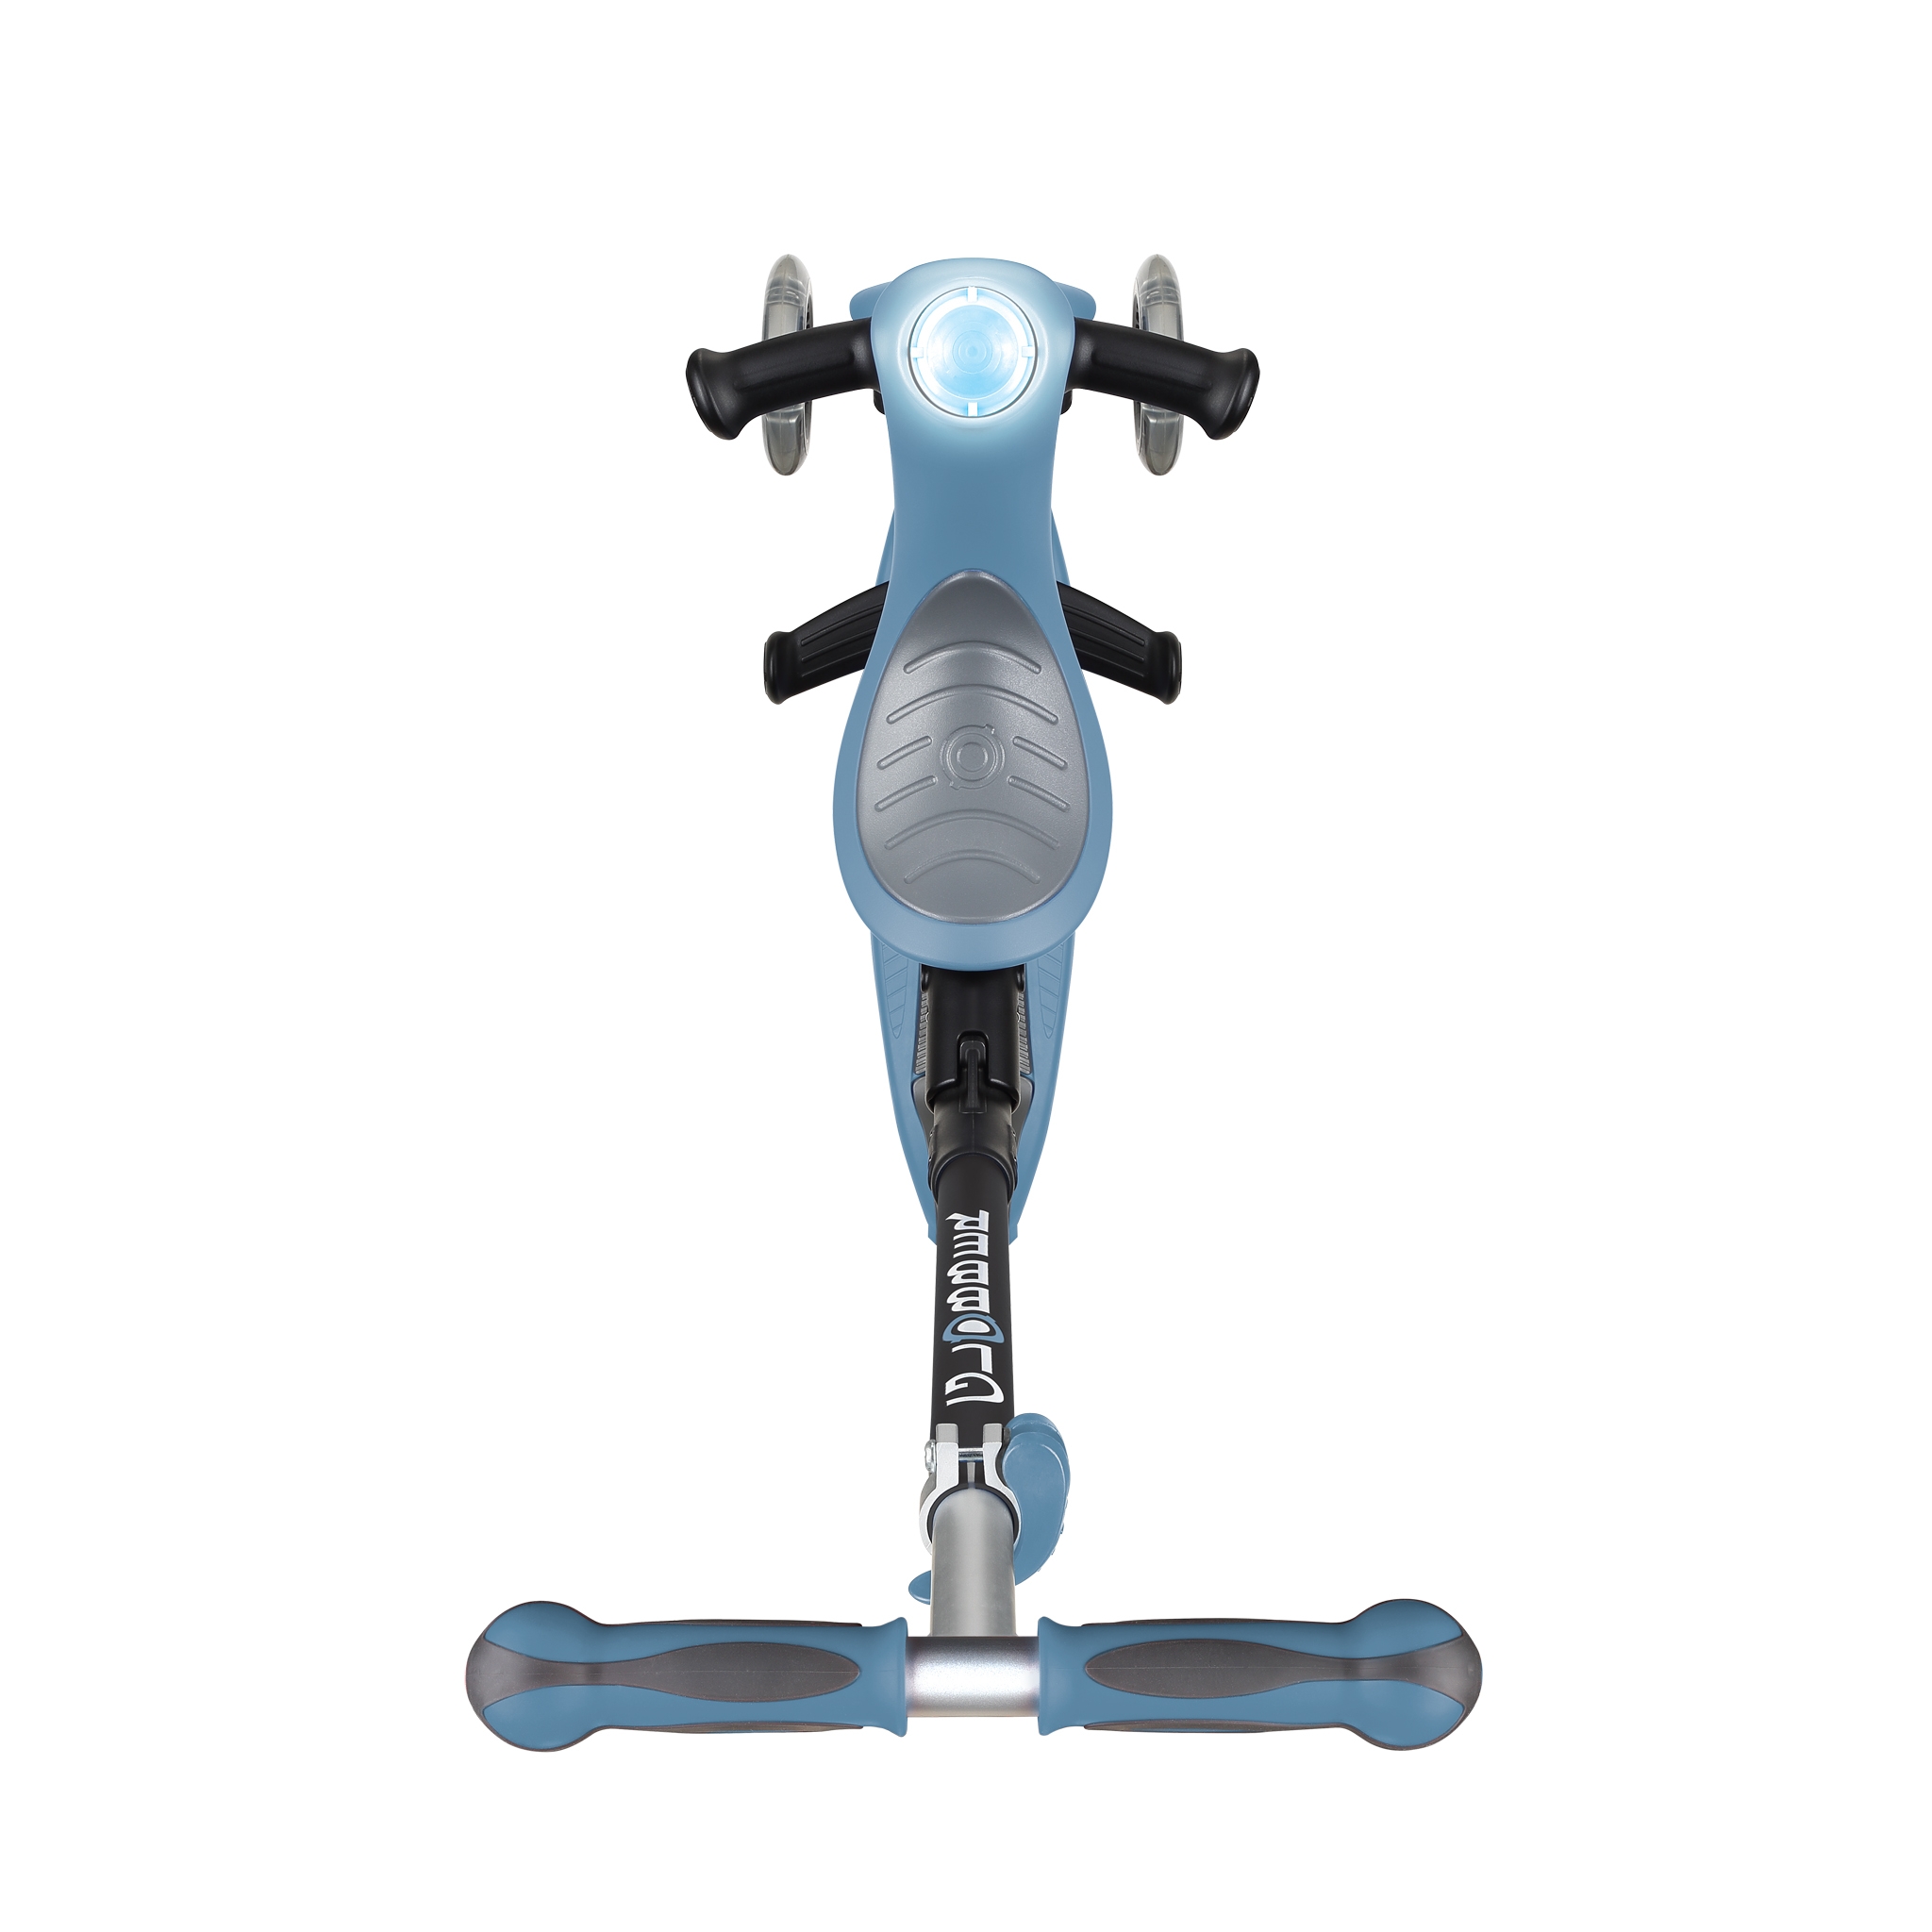 GO-UP-DELUXE-PLAY-ride-on-walking-bike-scooter-with-light-and-sound-module-and-extra-wide-3-height-adjustable-seat-ash-blue 2